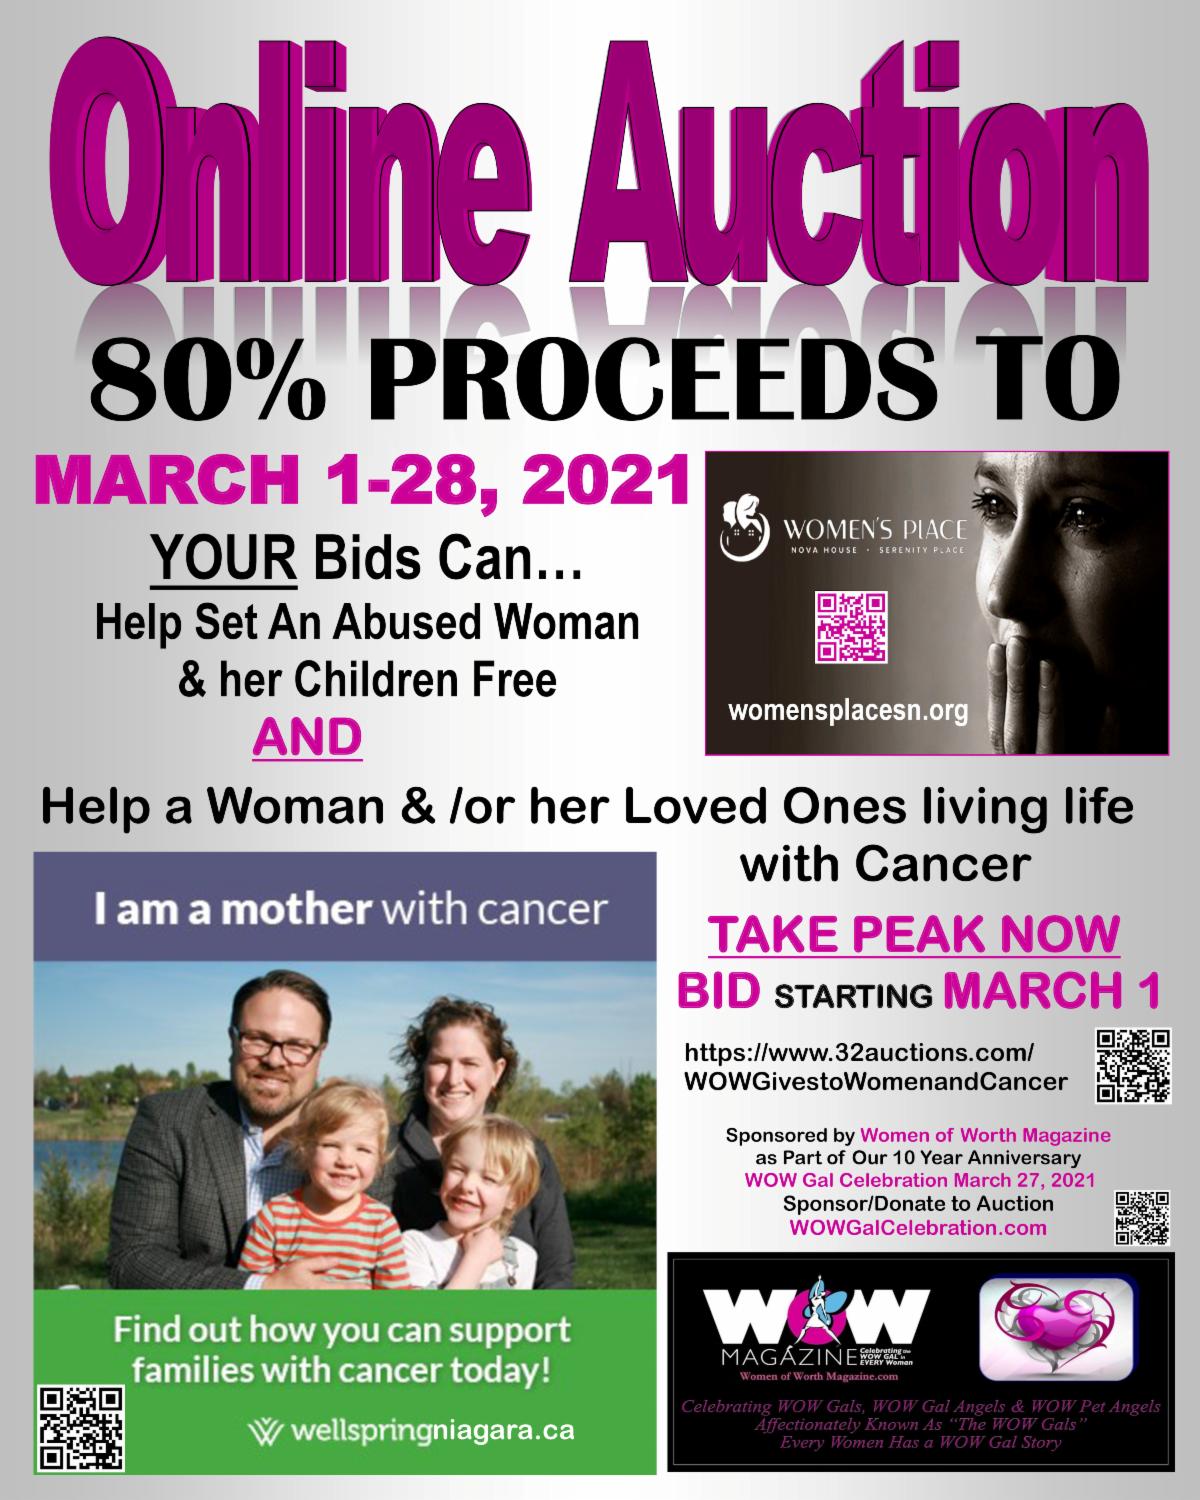 The Woman of Worth Magazine Online Auction is OPEN